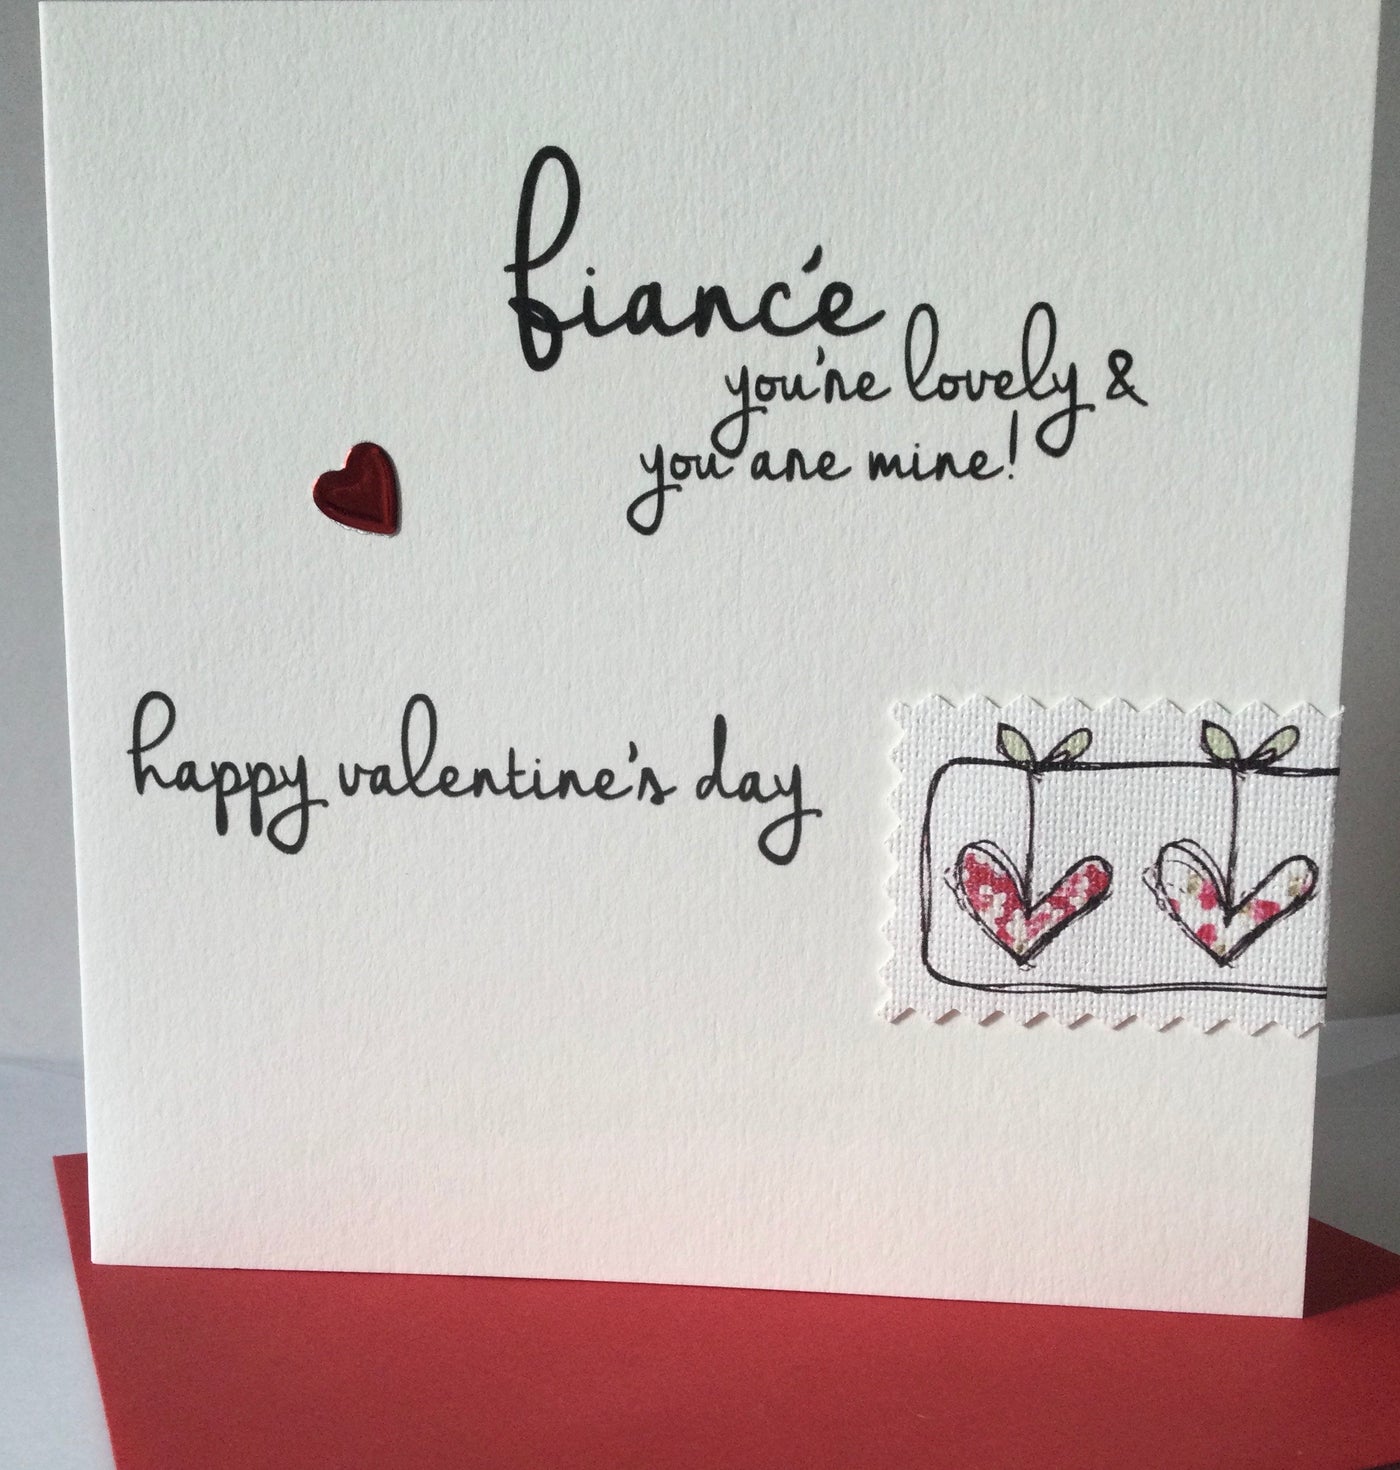 Tracey Russell Fiancé You’re Lovely & You Are Mine Valentines Card